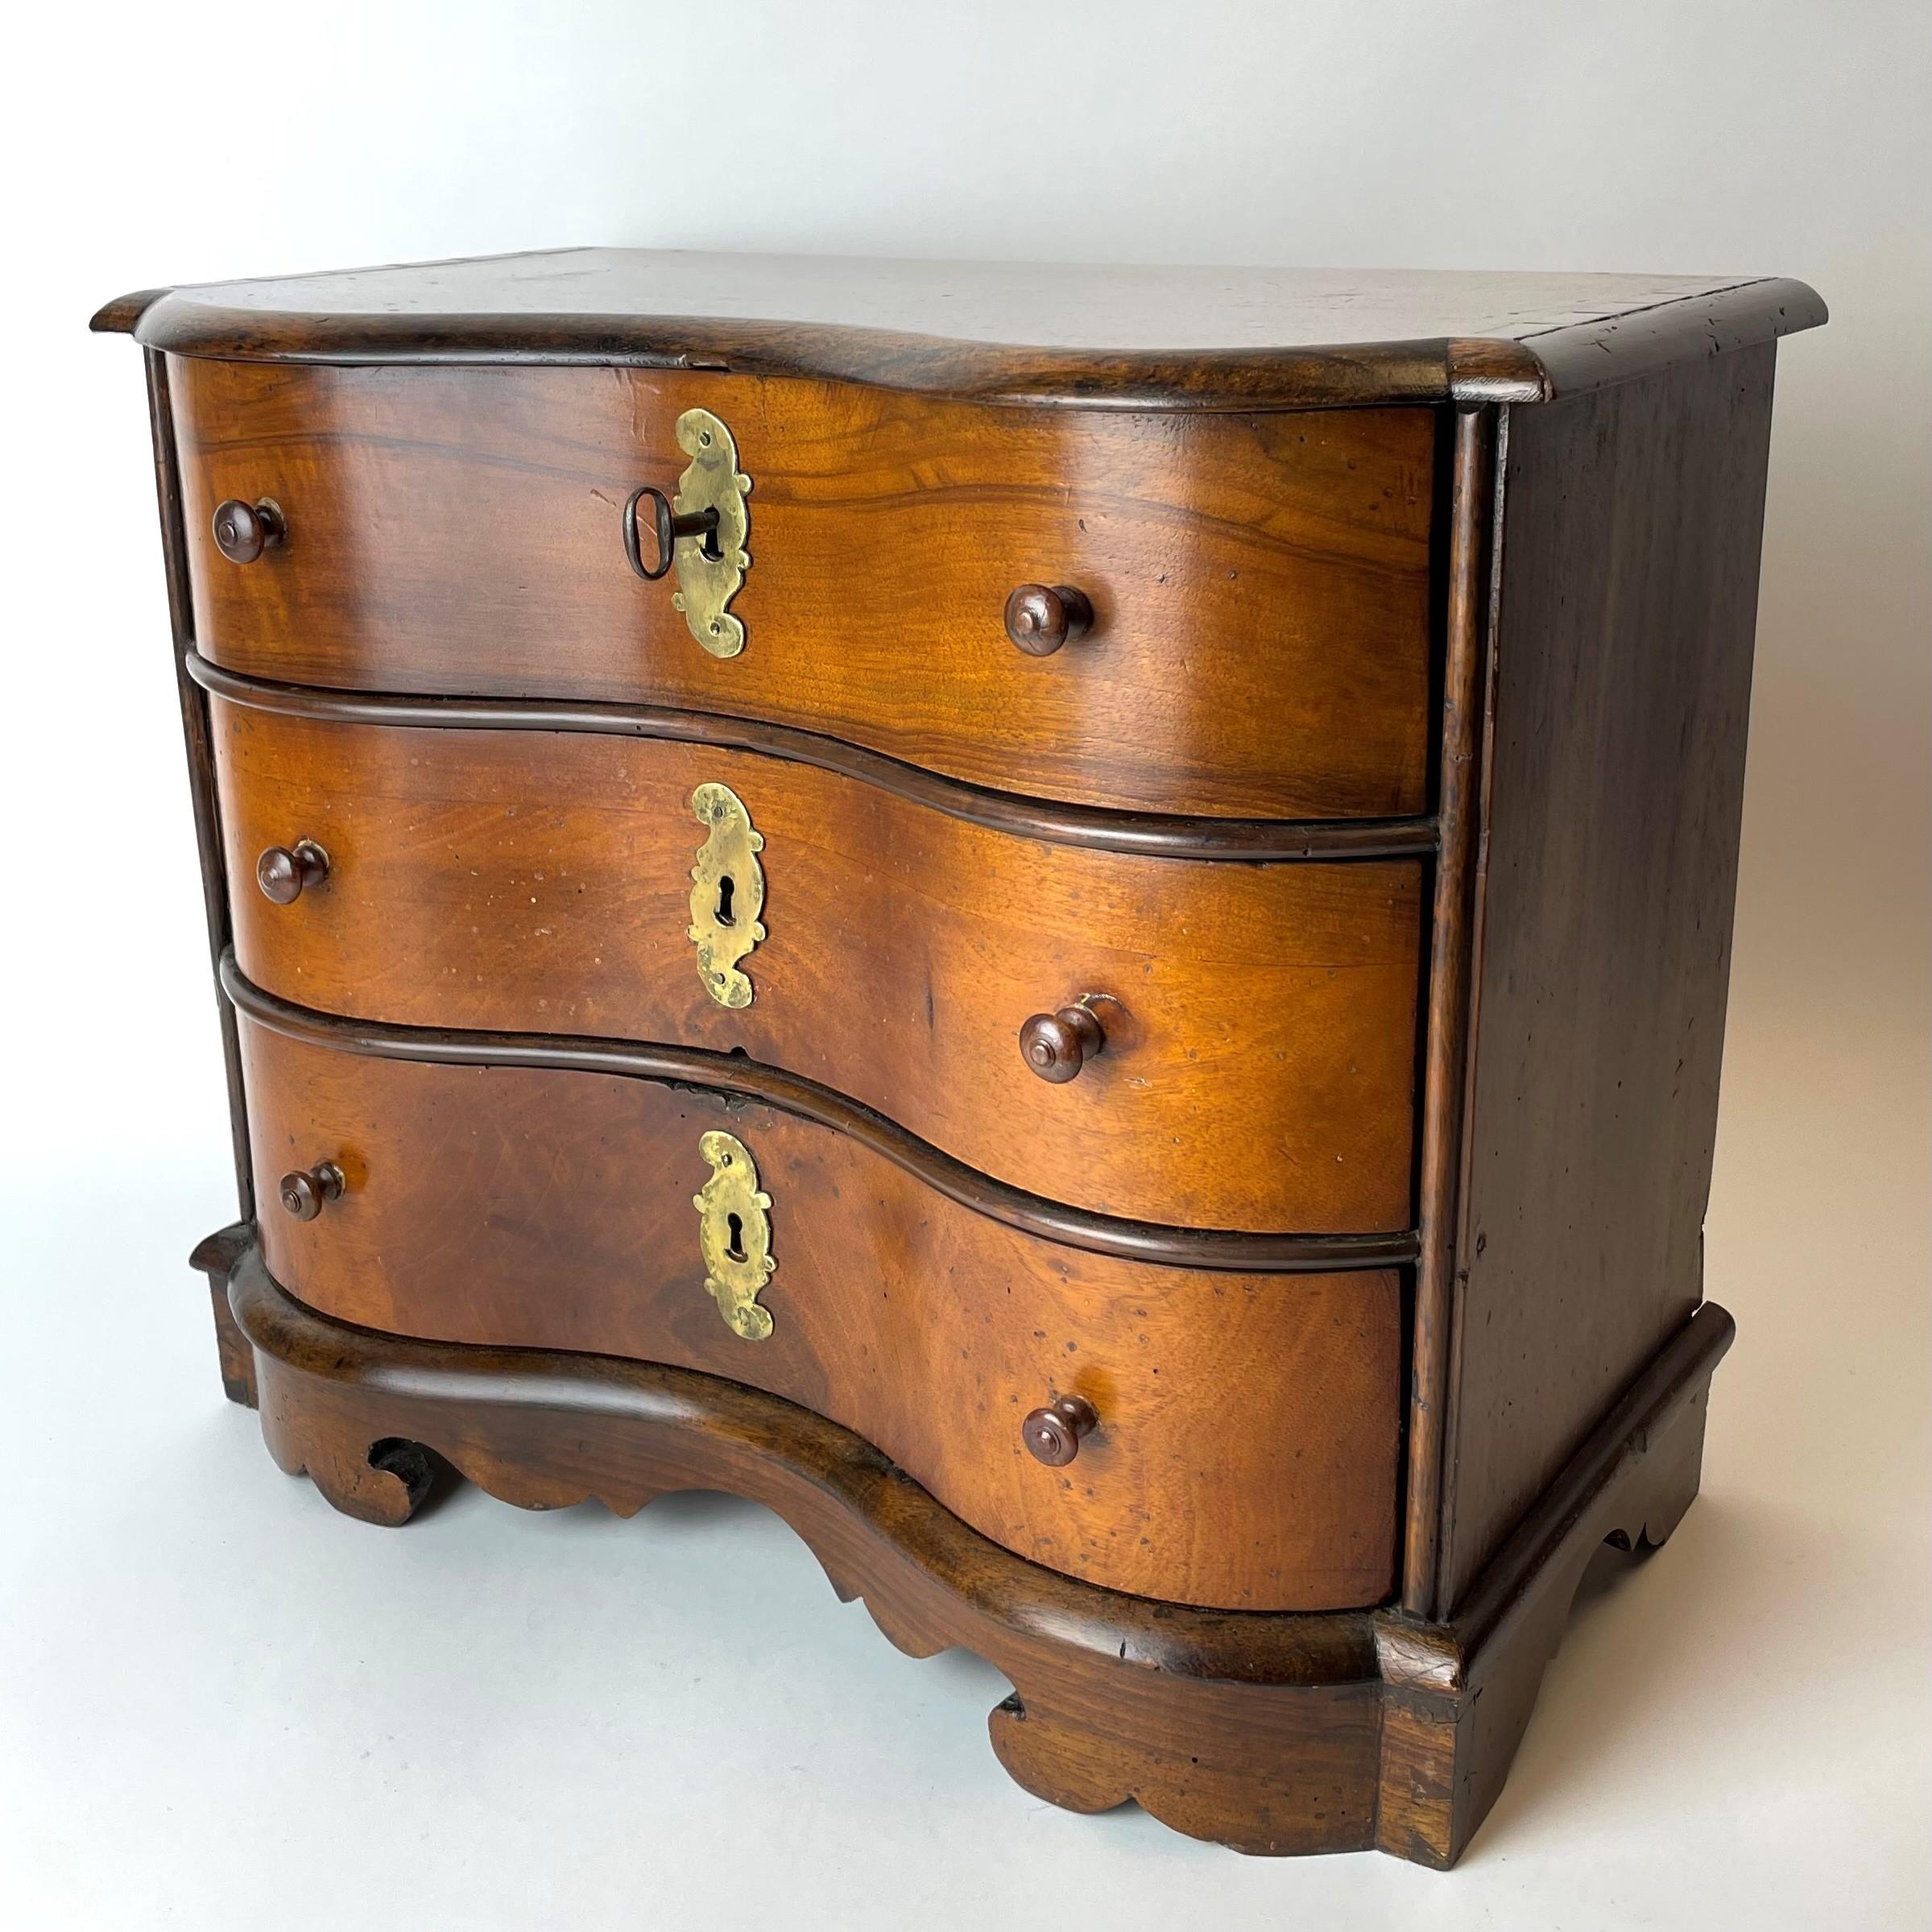 Rather large and rare miniature chest of drawers in late baroque from the early 18th century. Made in Walnut with key-plate in brass. All the drawers in the dresser with original locks and with fantastic original furnishings in marbled